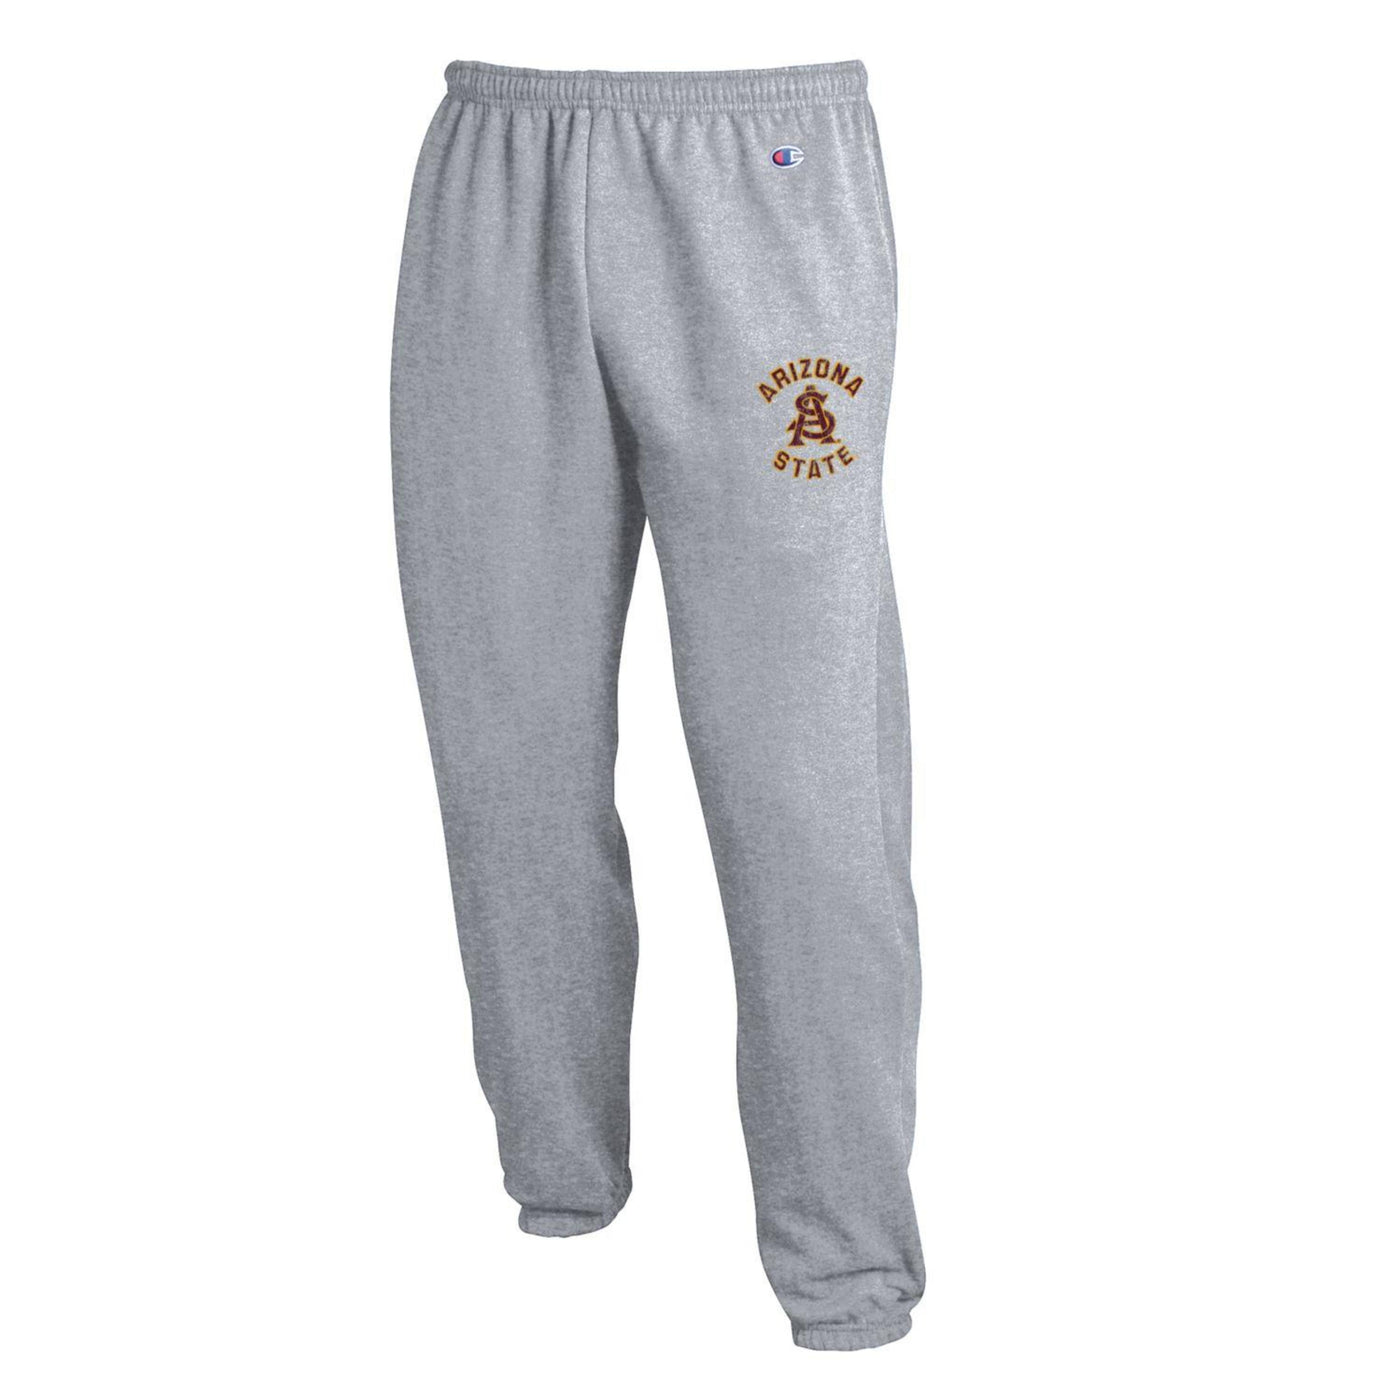 ASU gray sweat pants with drawstring waist, cuffed legs, and 'Arizona State' lettering surrounding an interlocking 'A' and 'S' on the left pant leg